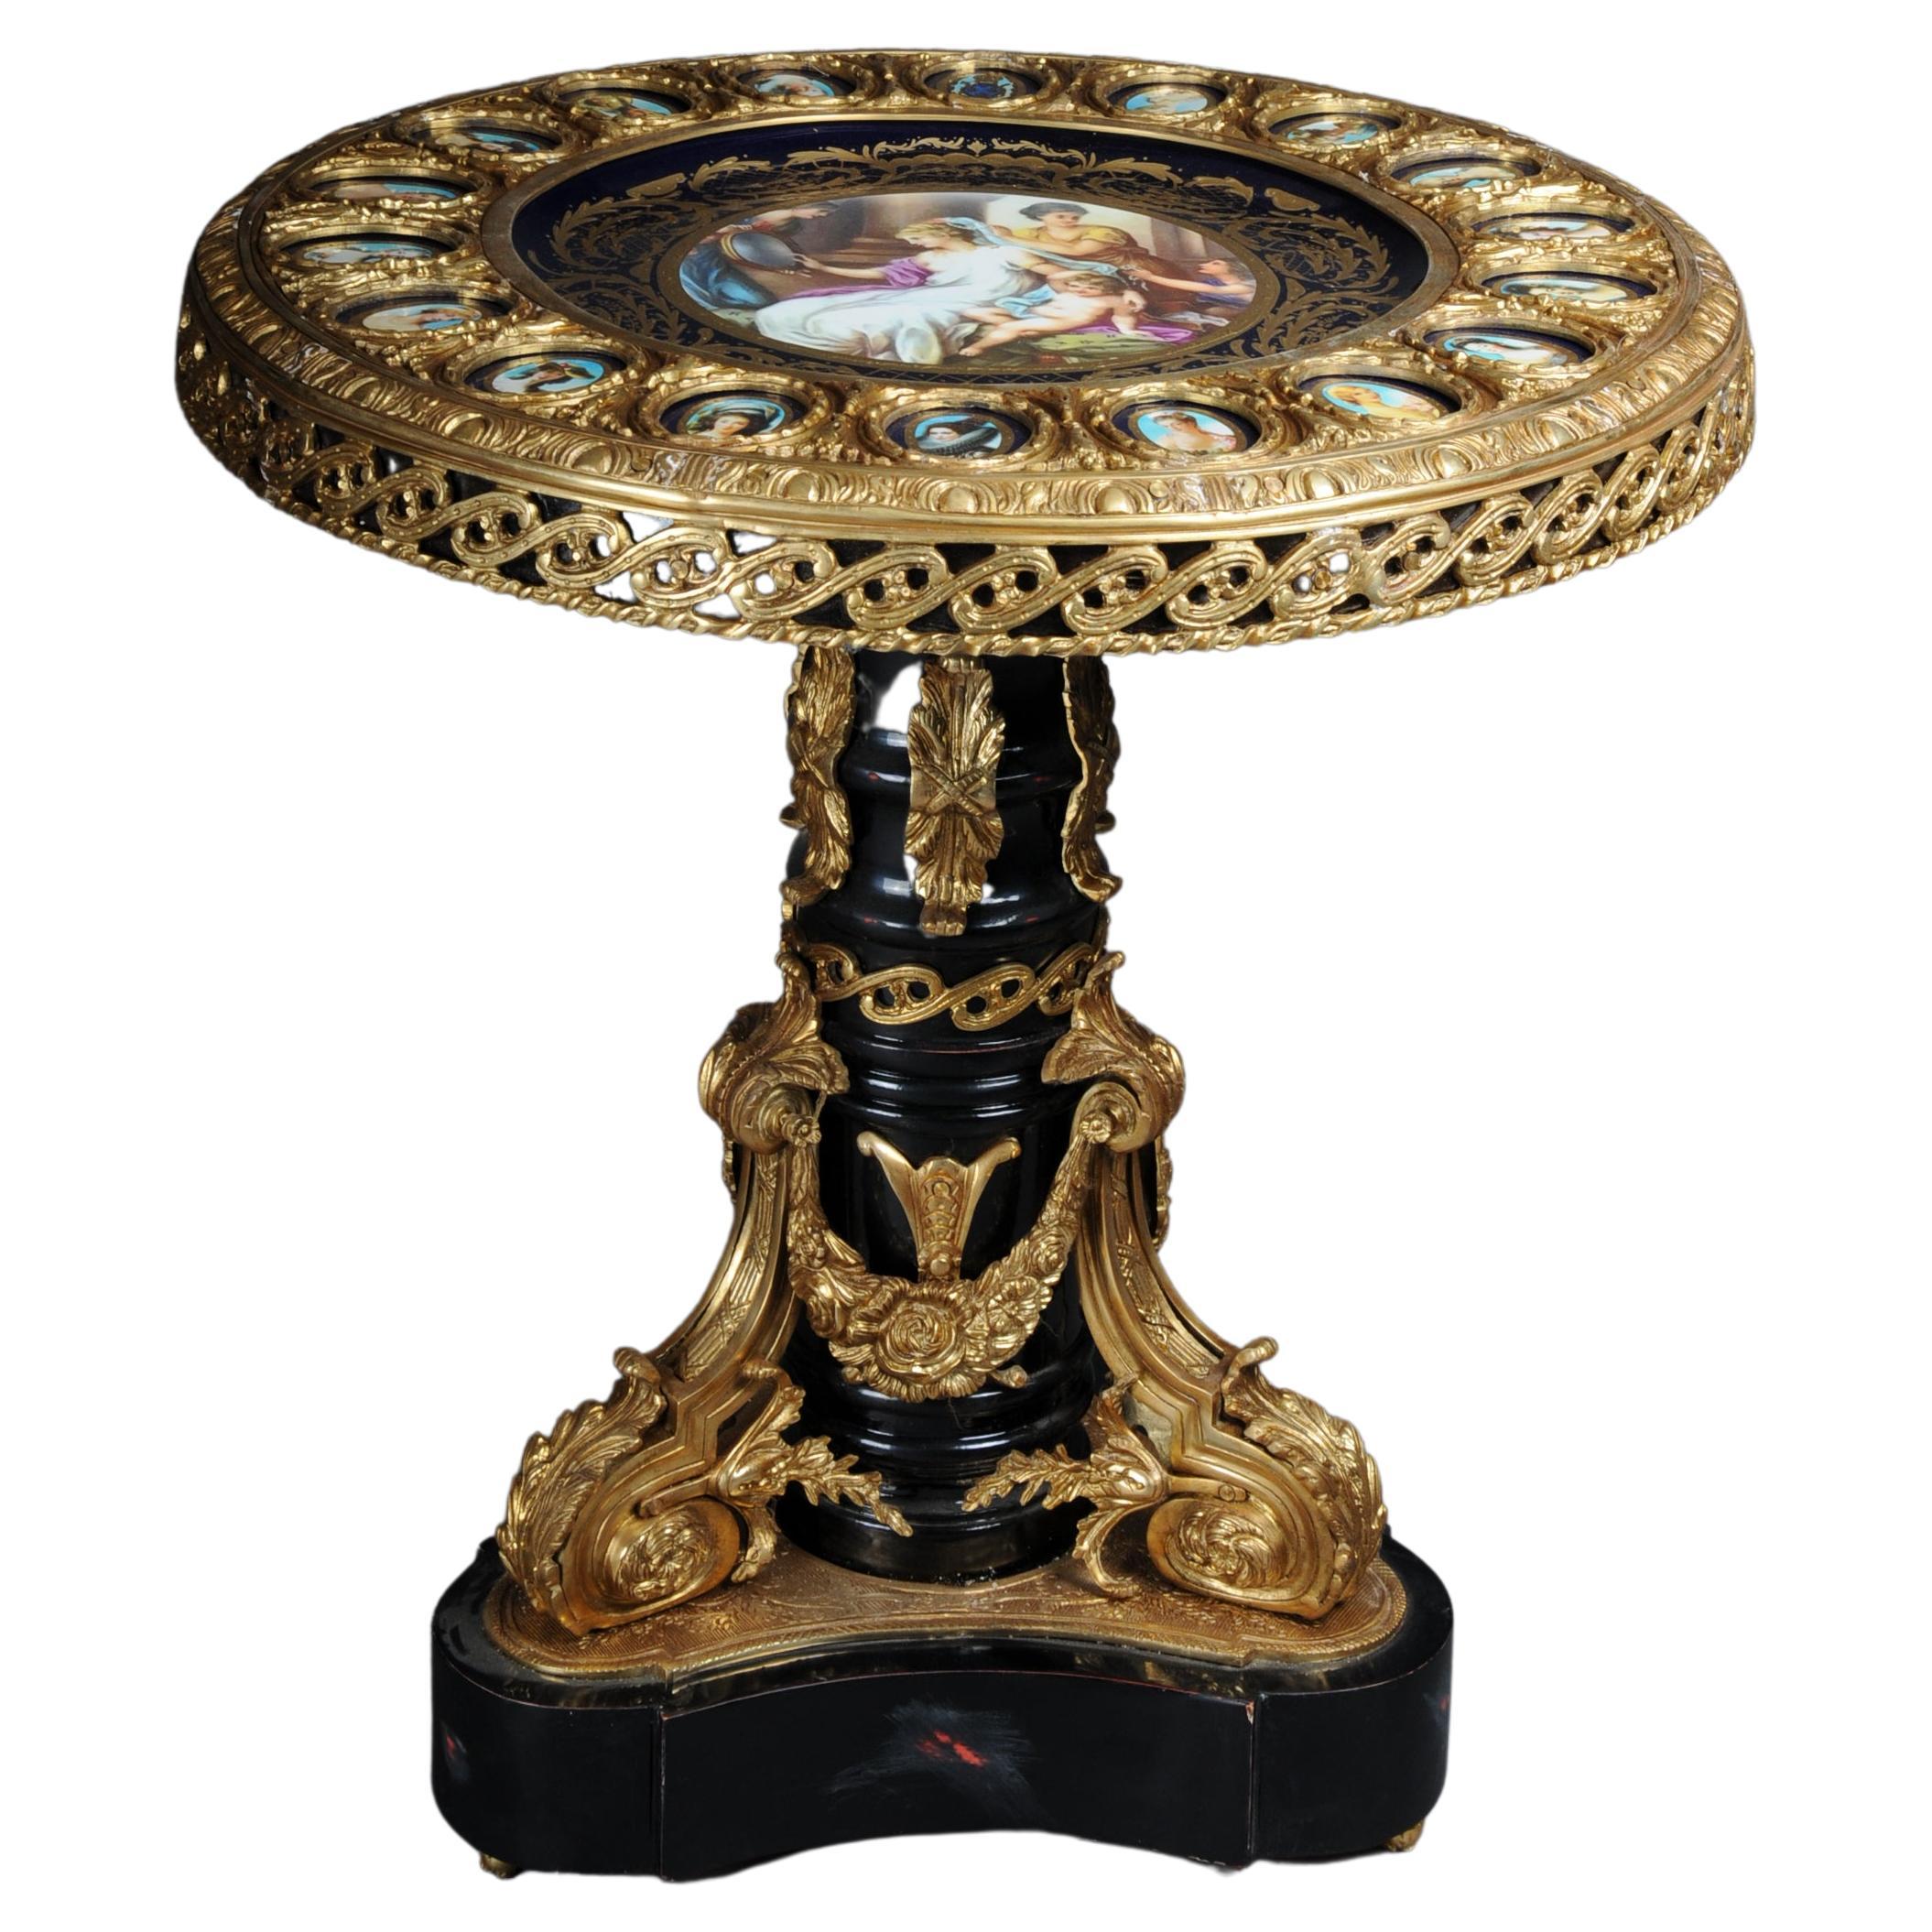 Imperial Center Table, Frame and Top Mount in Porcelain with Sevres Style Bronze